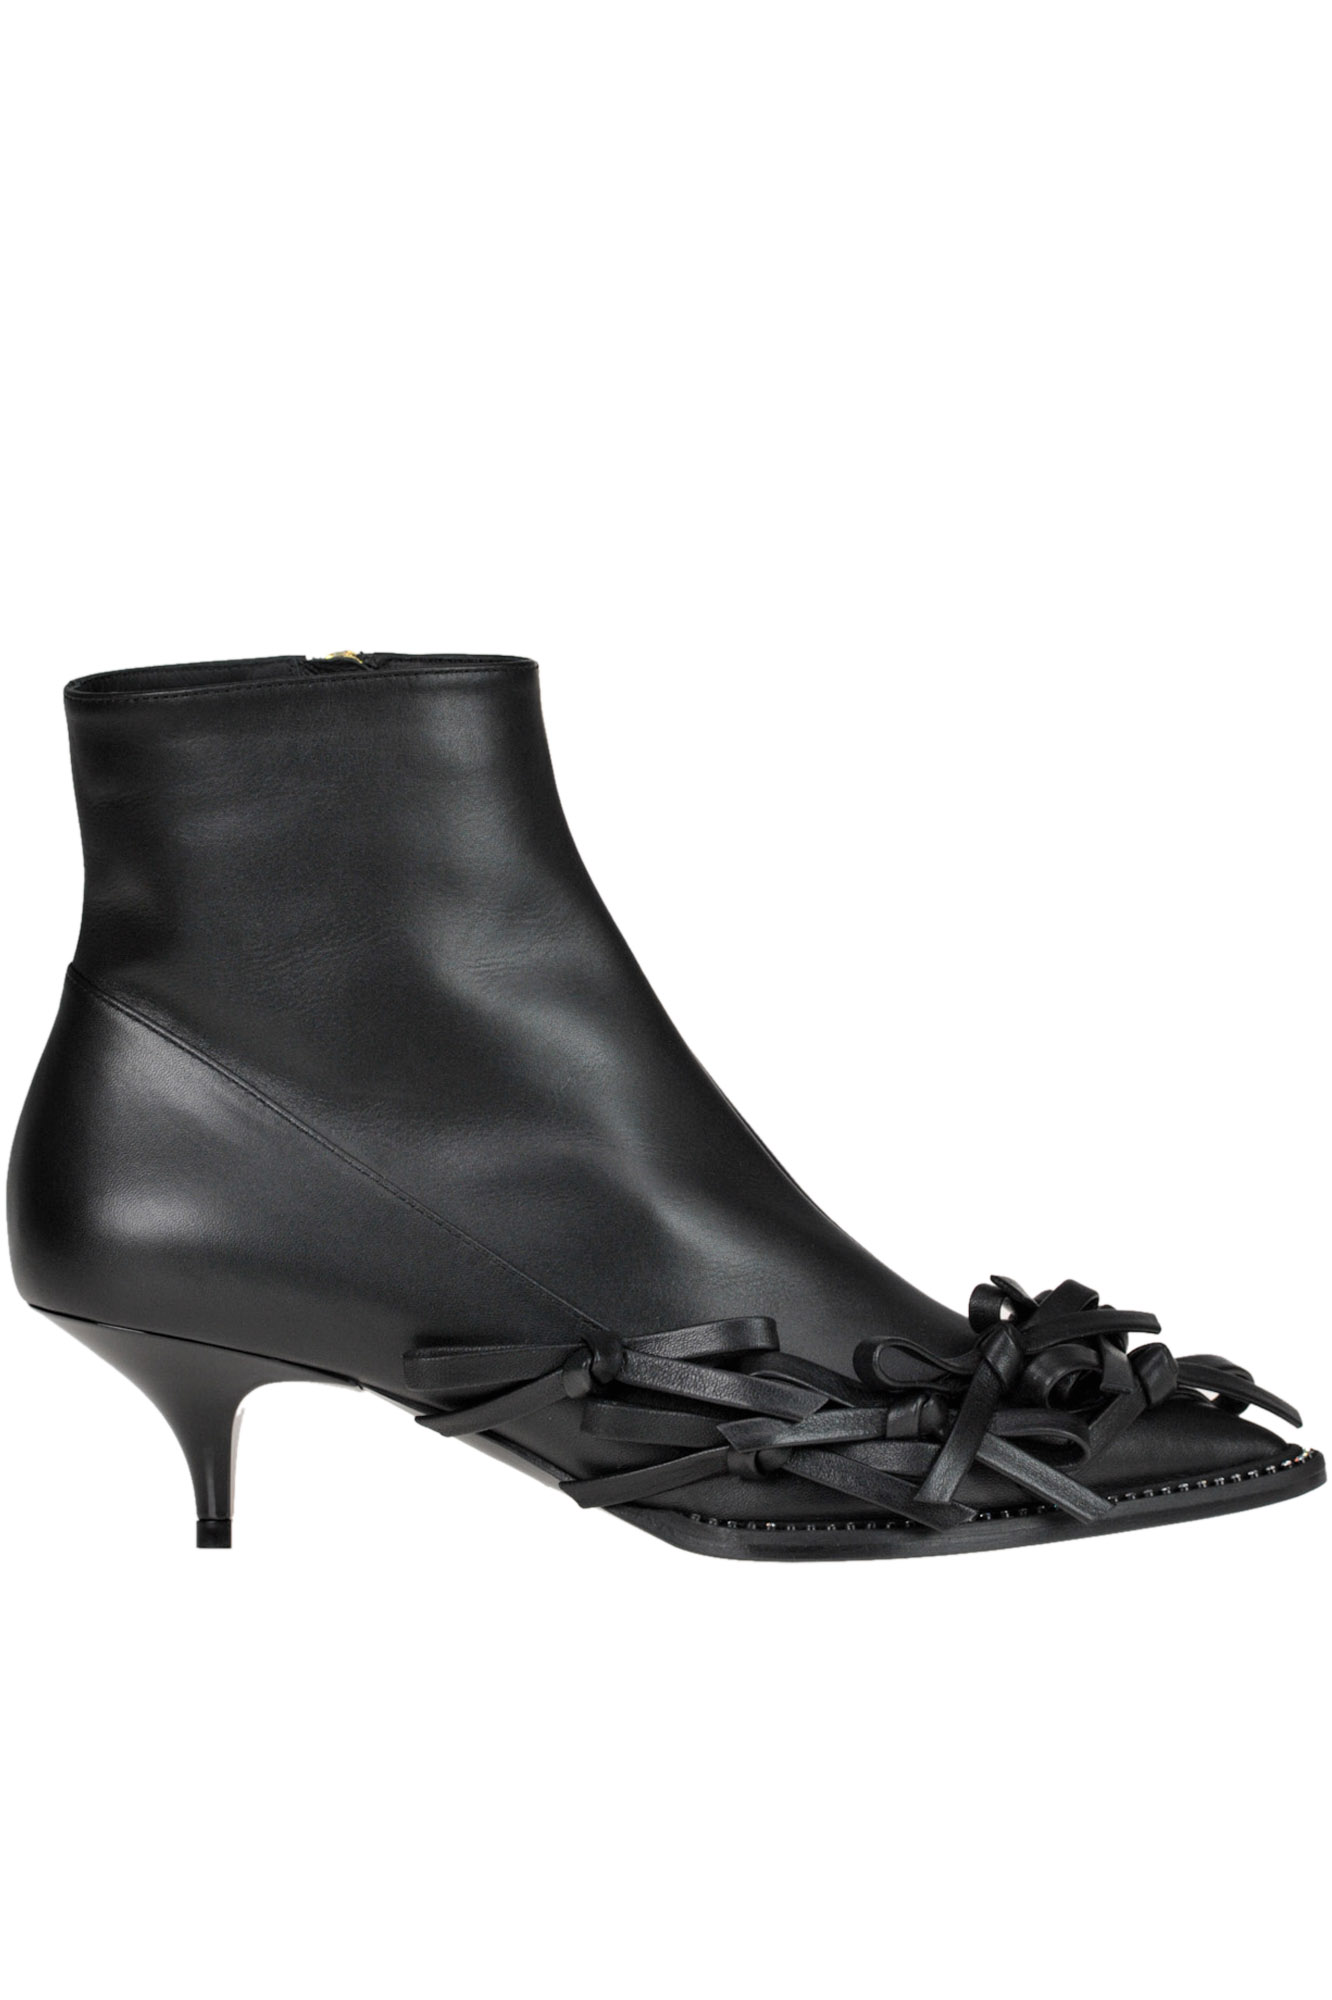 N°21 LEATHER ANKLE-BOOTS WITH BOWS